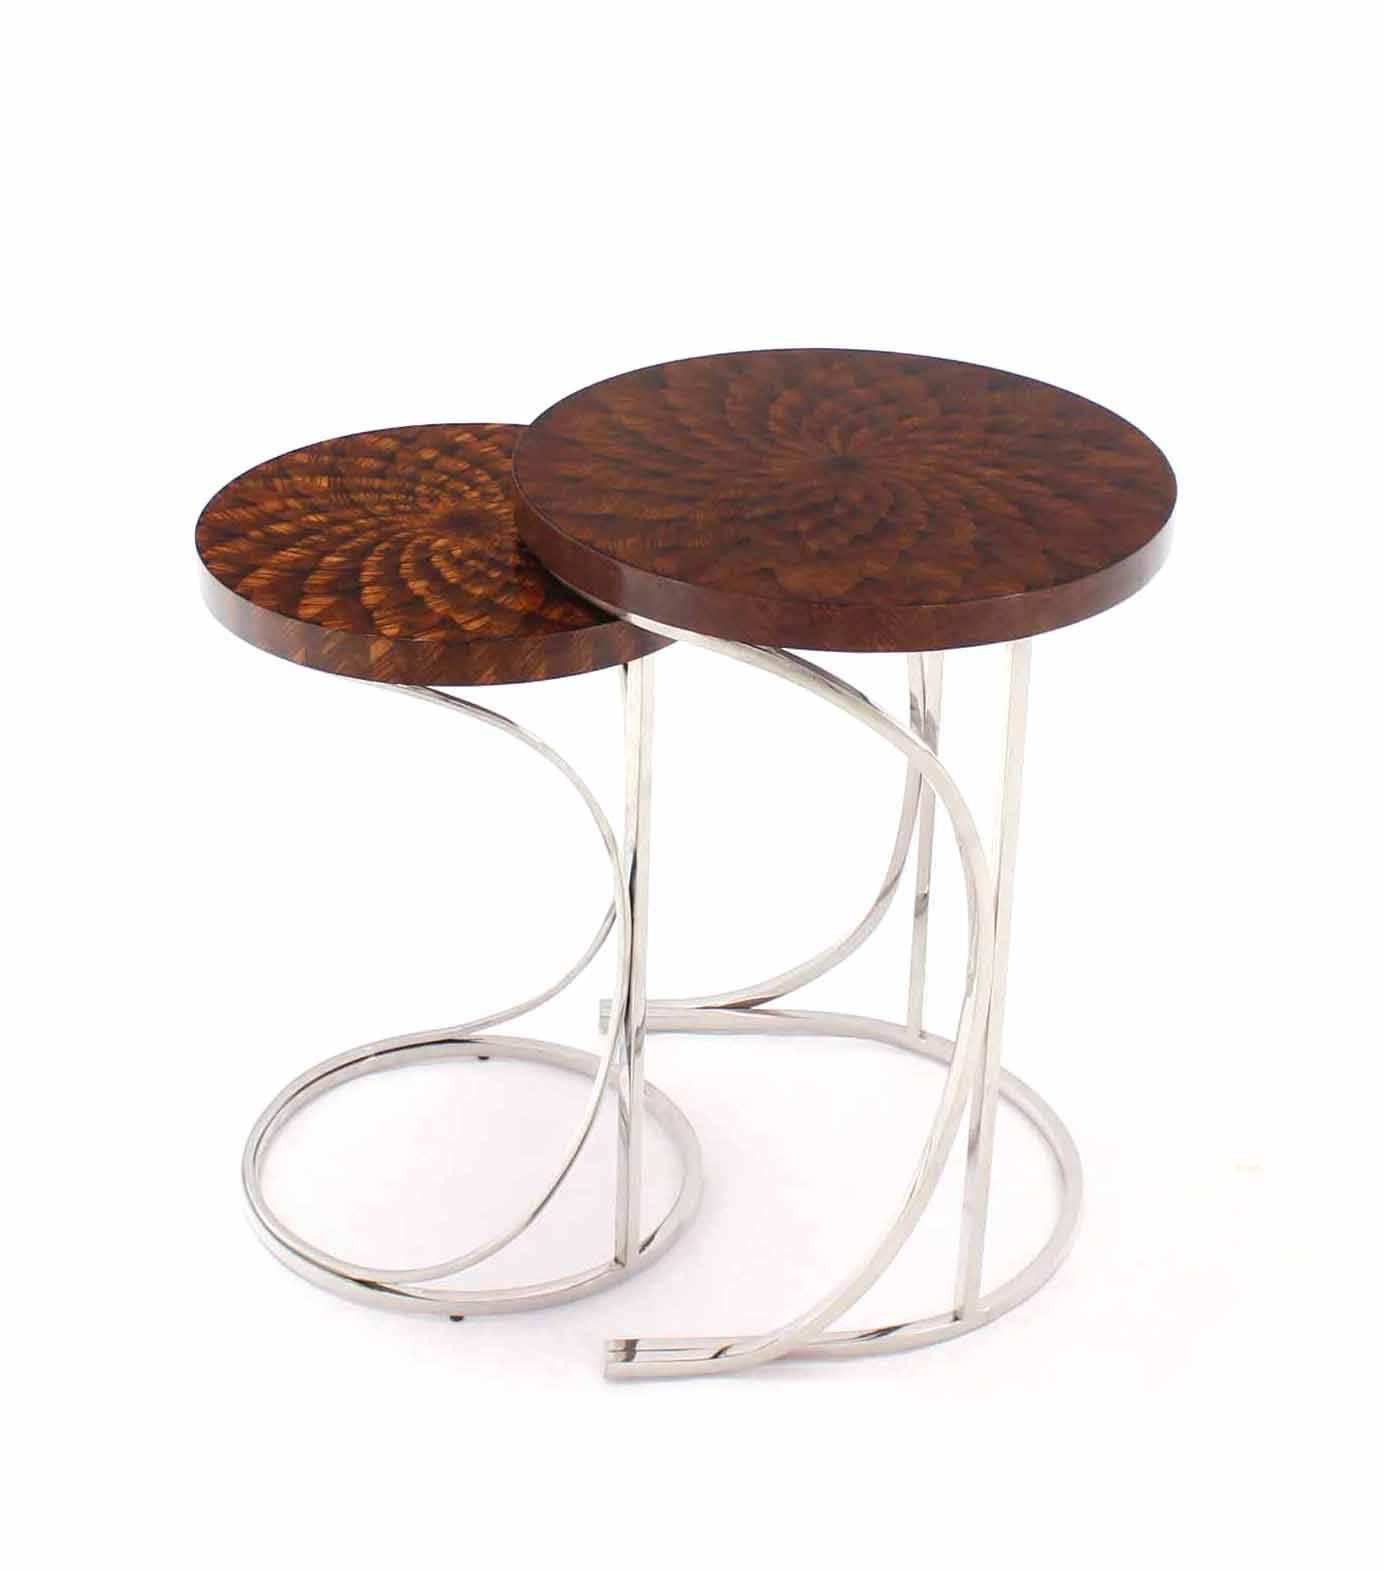 Outstanding quality stainless steel bases beautiful wood marquetry top nesting tables.